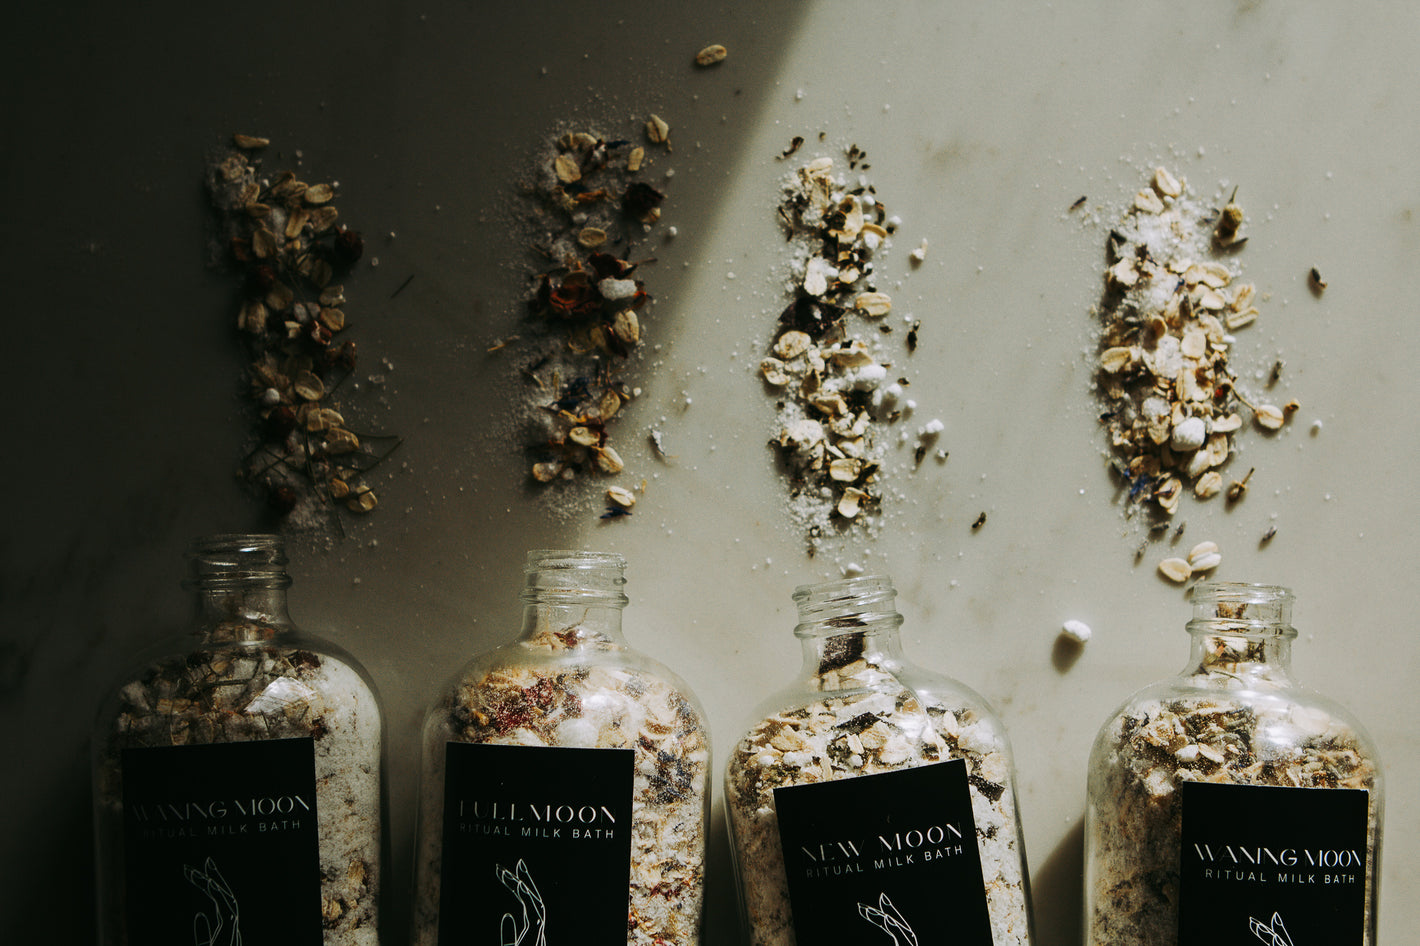 Four clear bottles lay on their sides with a mix of botanicals, salt, and oatmeal spilling out.